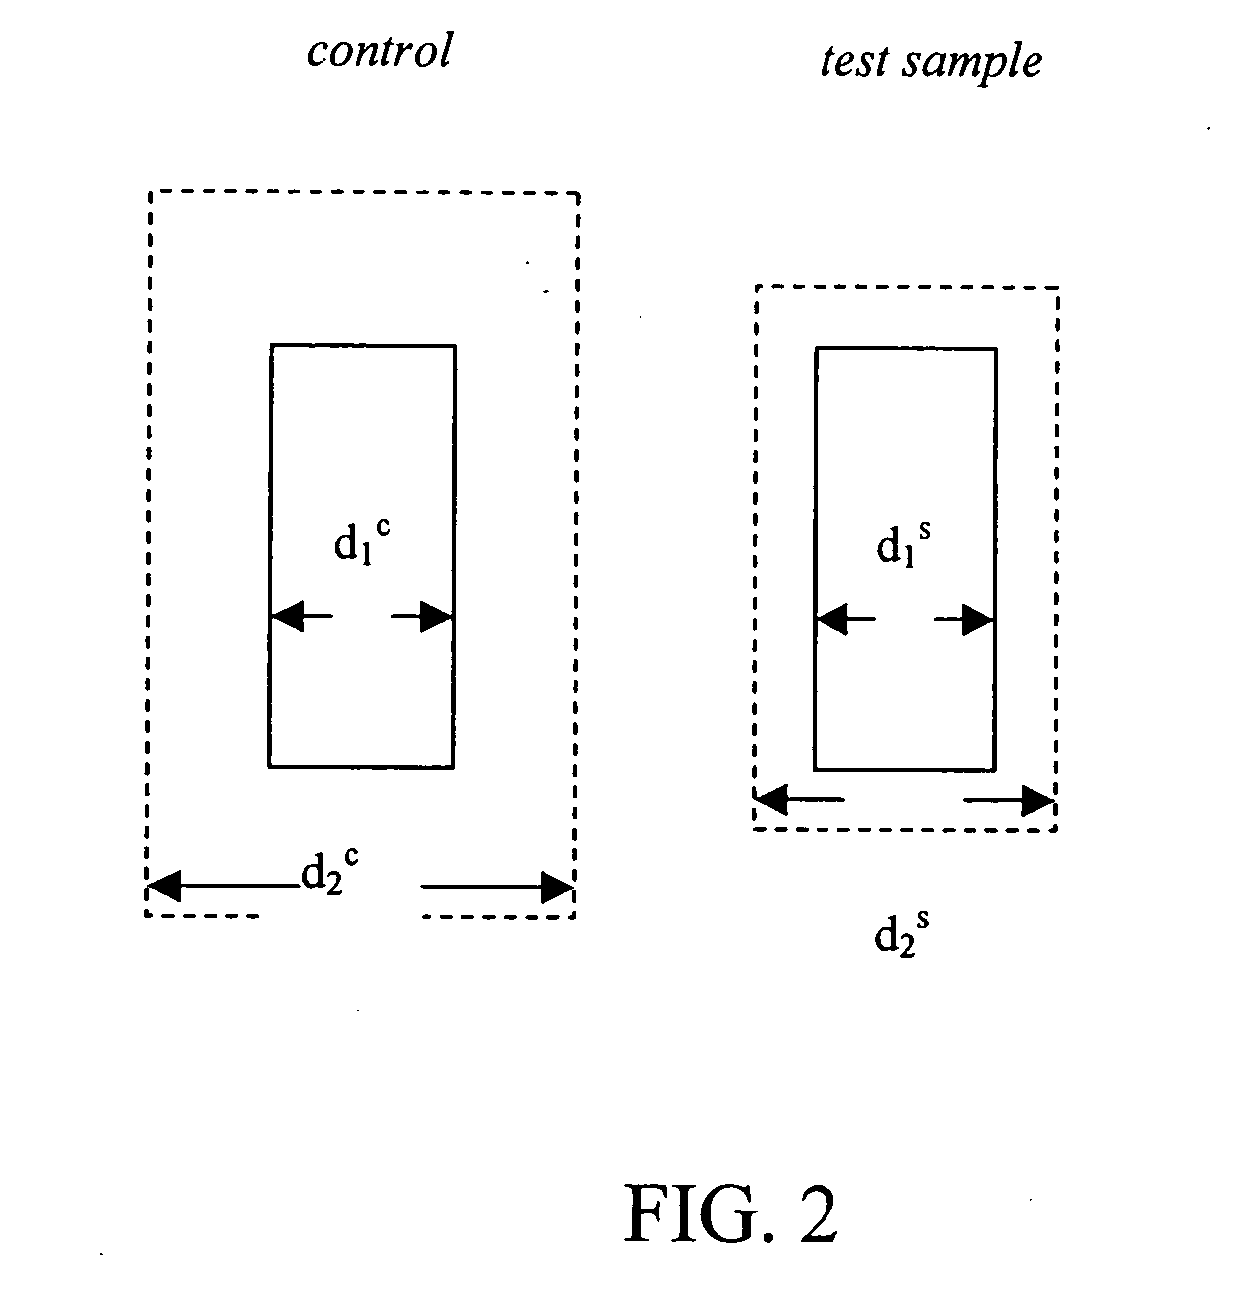 Tropicalizing agent, and methods for making and using the same